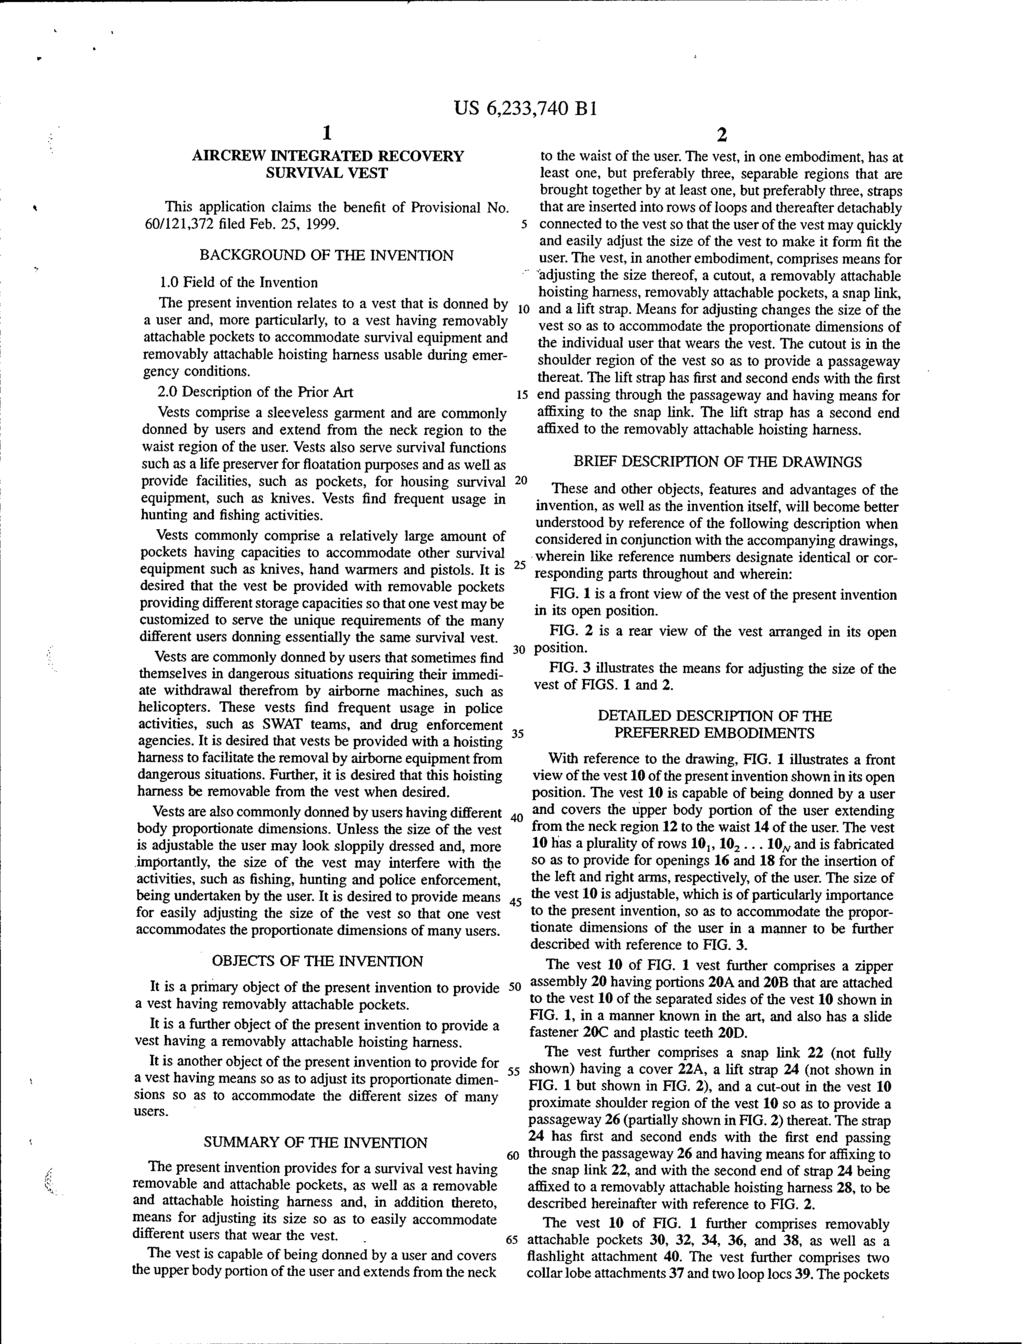 US 6,233,740 Bl AIRCREW INTEGRATED RECOVERY SURVIVAL VEST This application claims the benefit of Provisional No. 60/121,372 filed Feb. 25, 1999. BACKGROUND OF THE INVENTION 1.